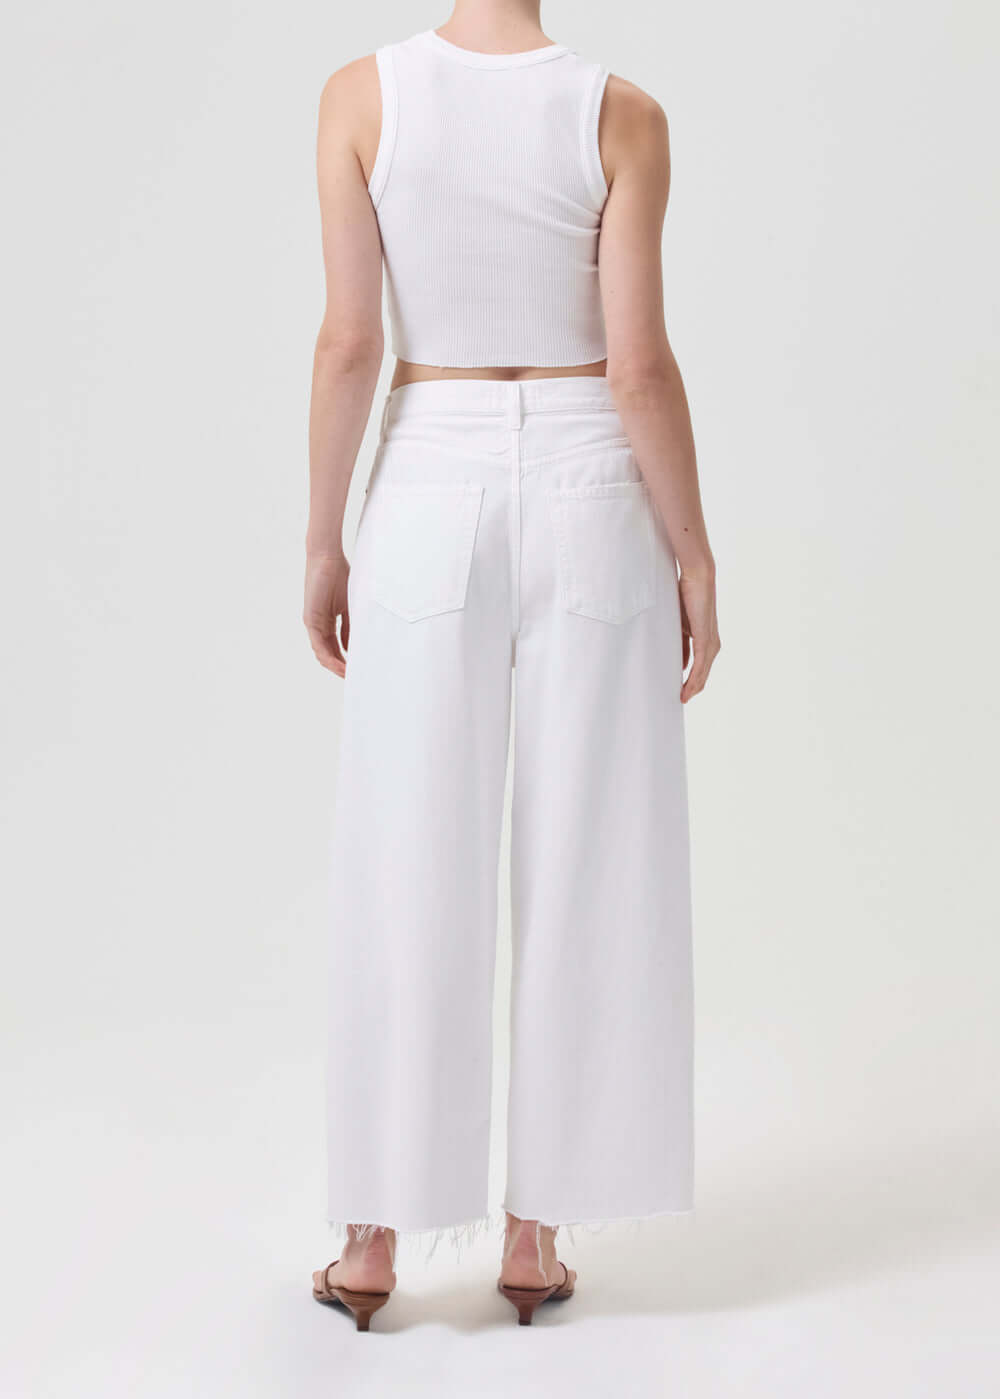 Agolde Cropped Poppy Tank in White available at TNT The New Trend Australia.